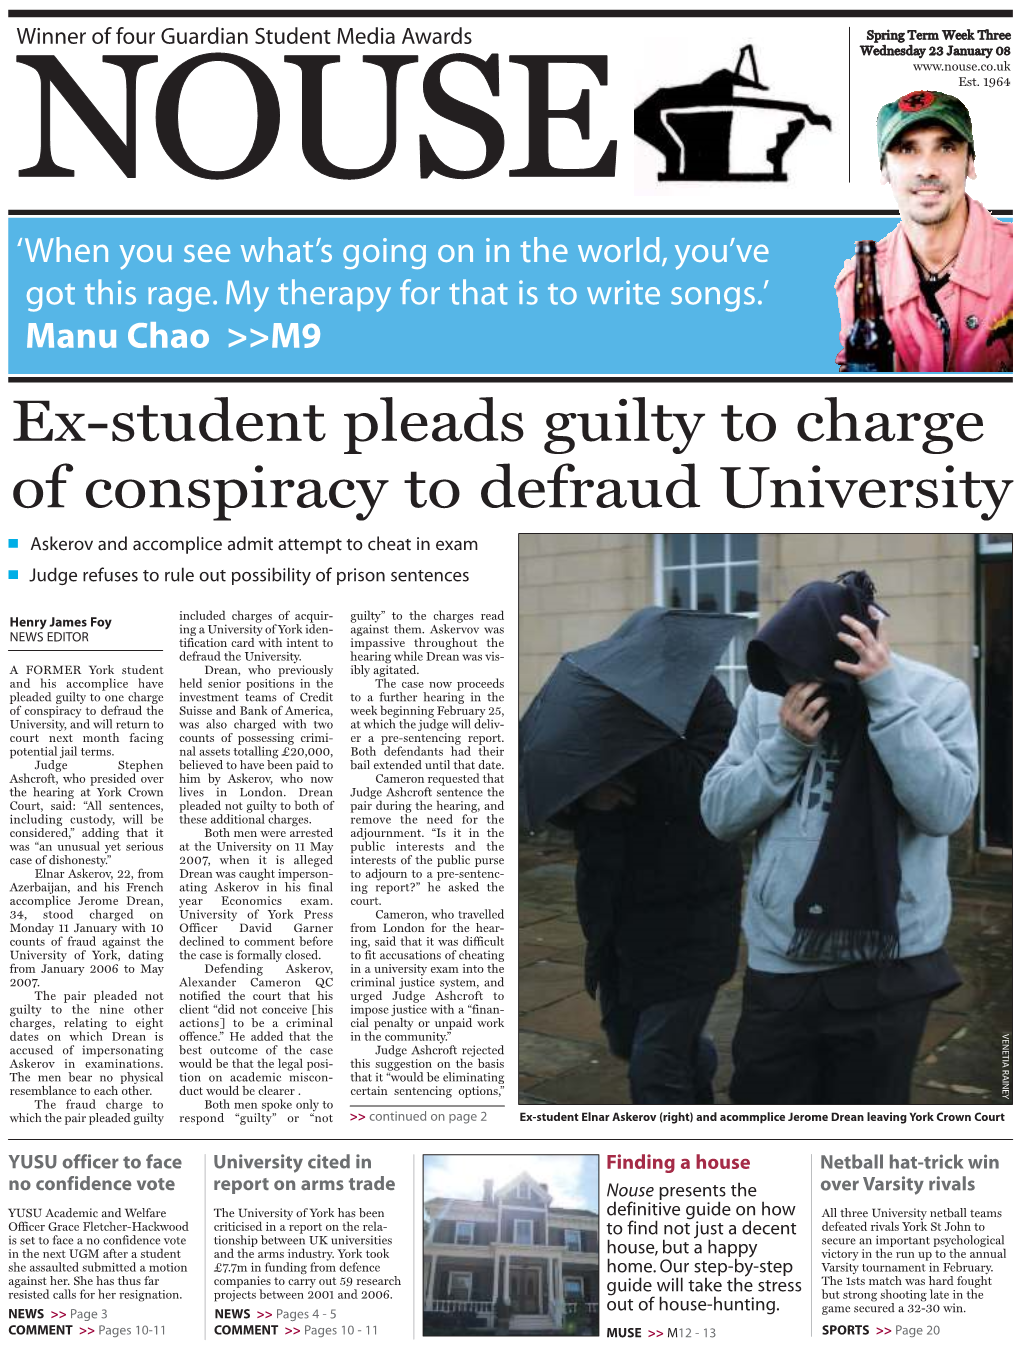 Ex-Student Pleads Guilty to Charge of Conspiracy to Defraud University